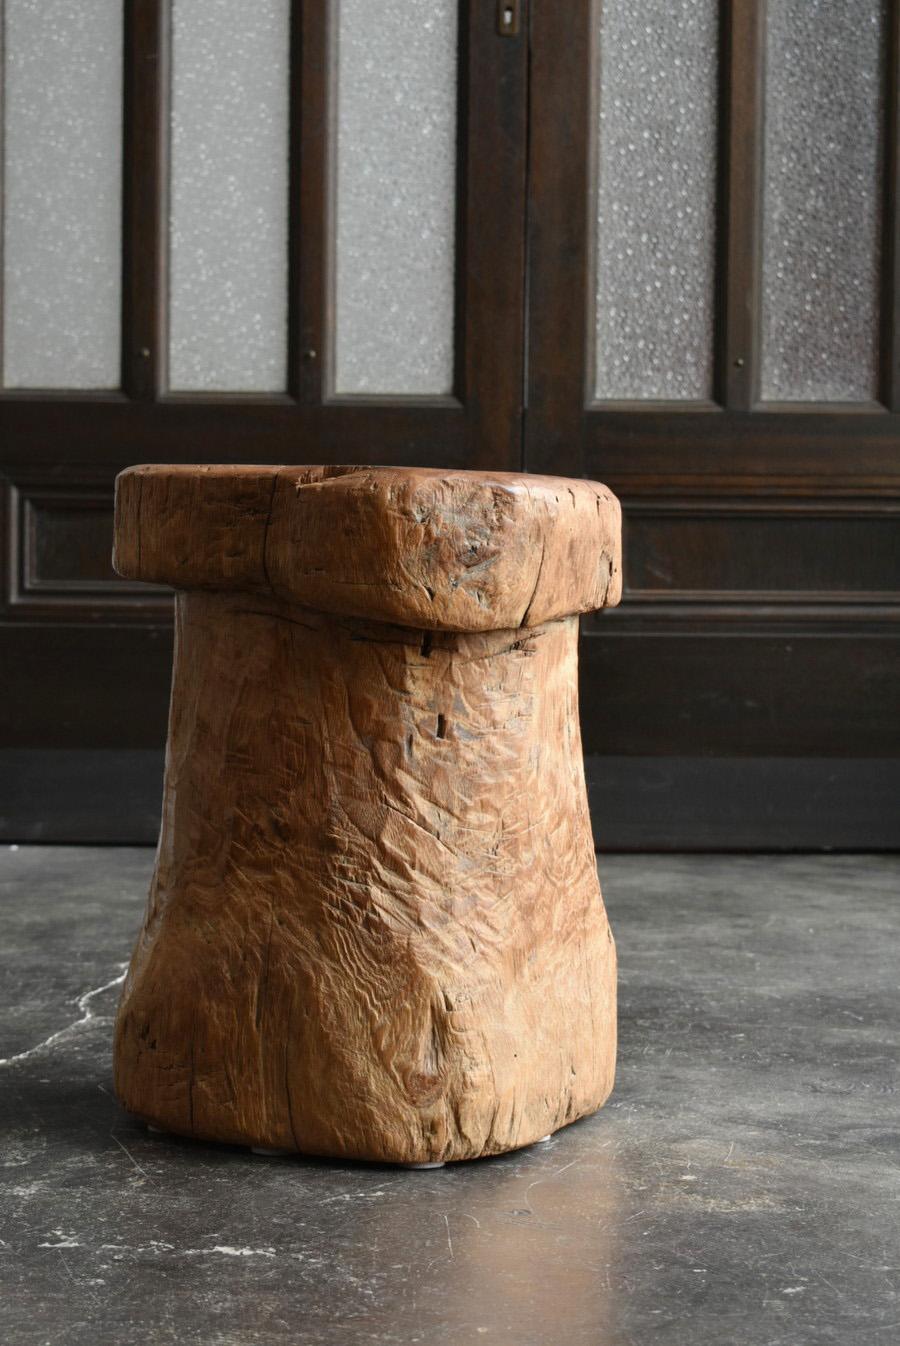 Indonesian Mushroom-Shaped Old Stool/Primitive Design/early 20th century/Stock A 3